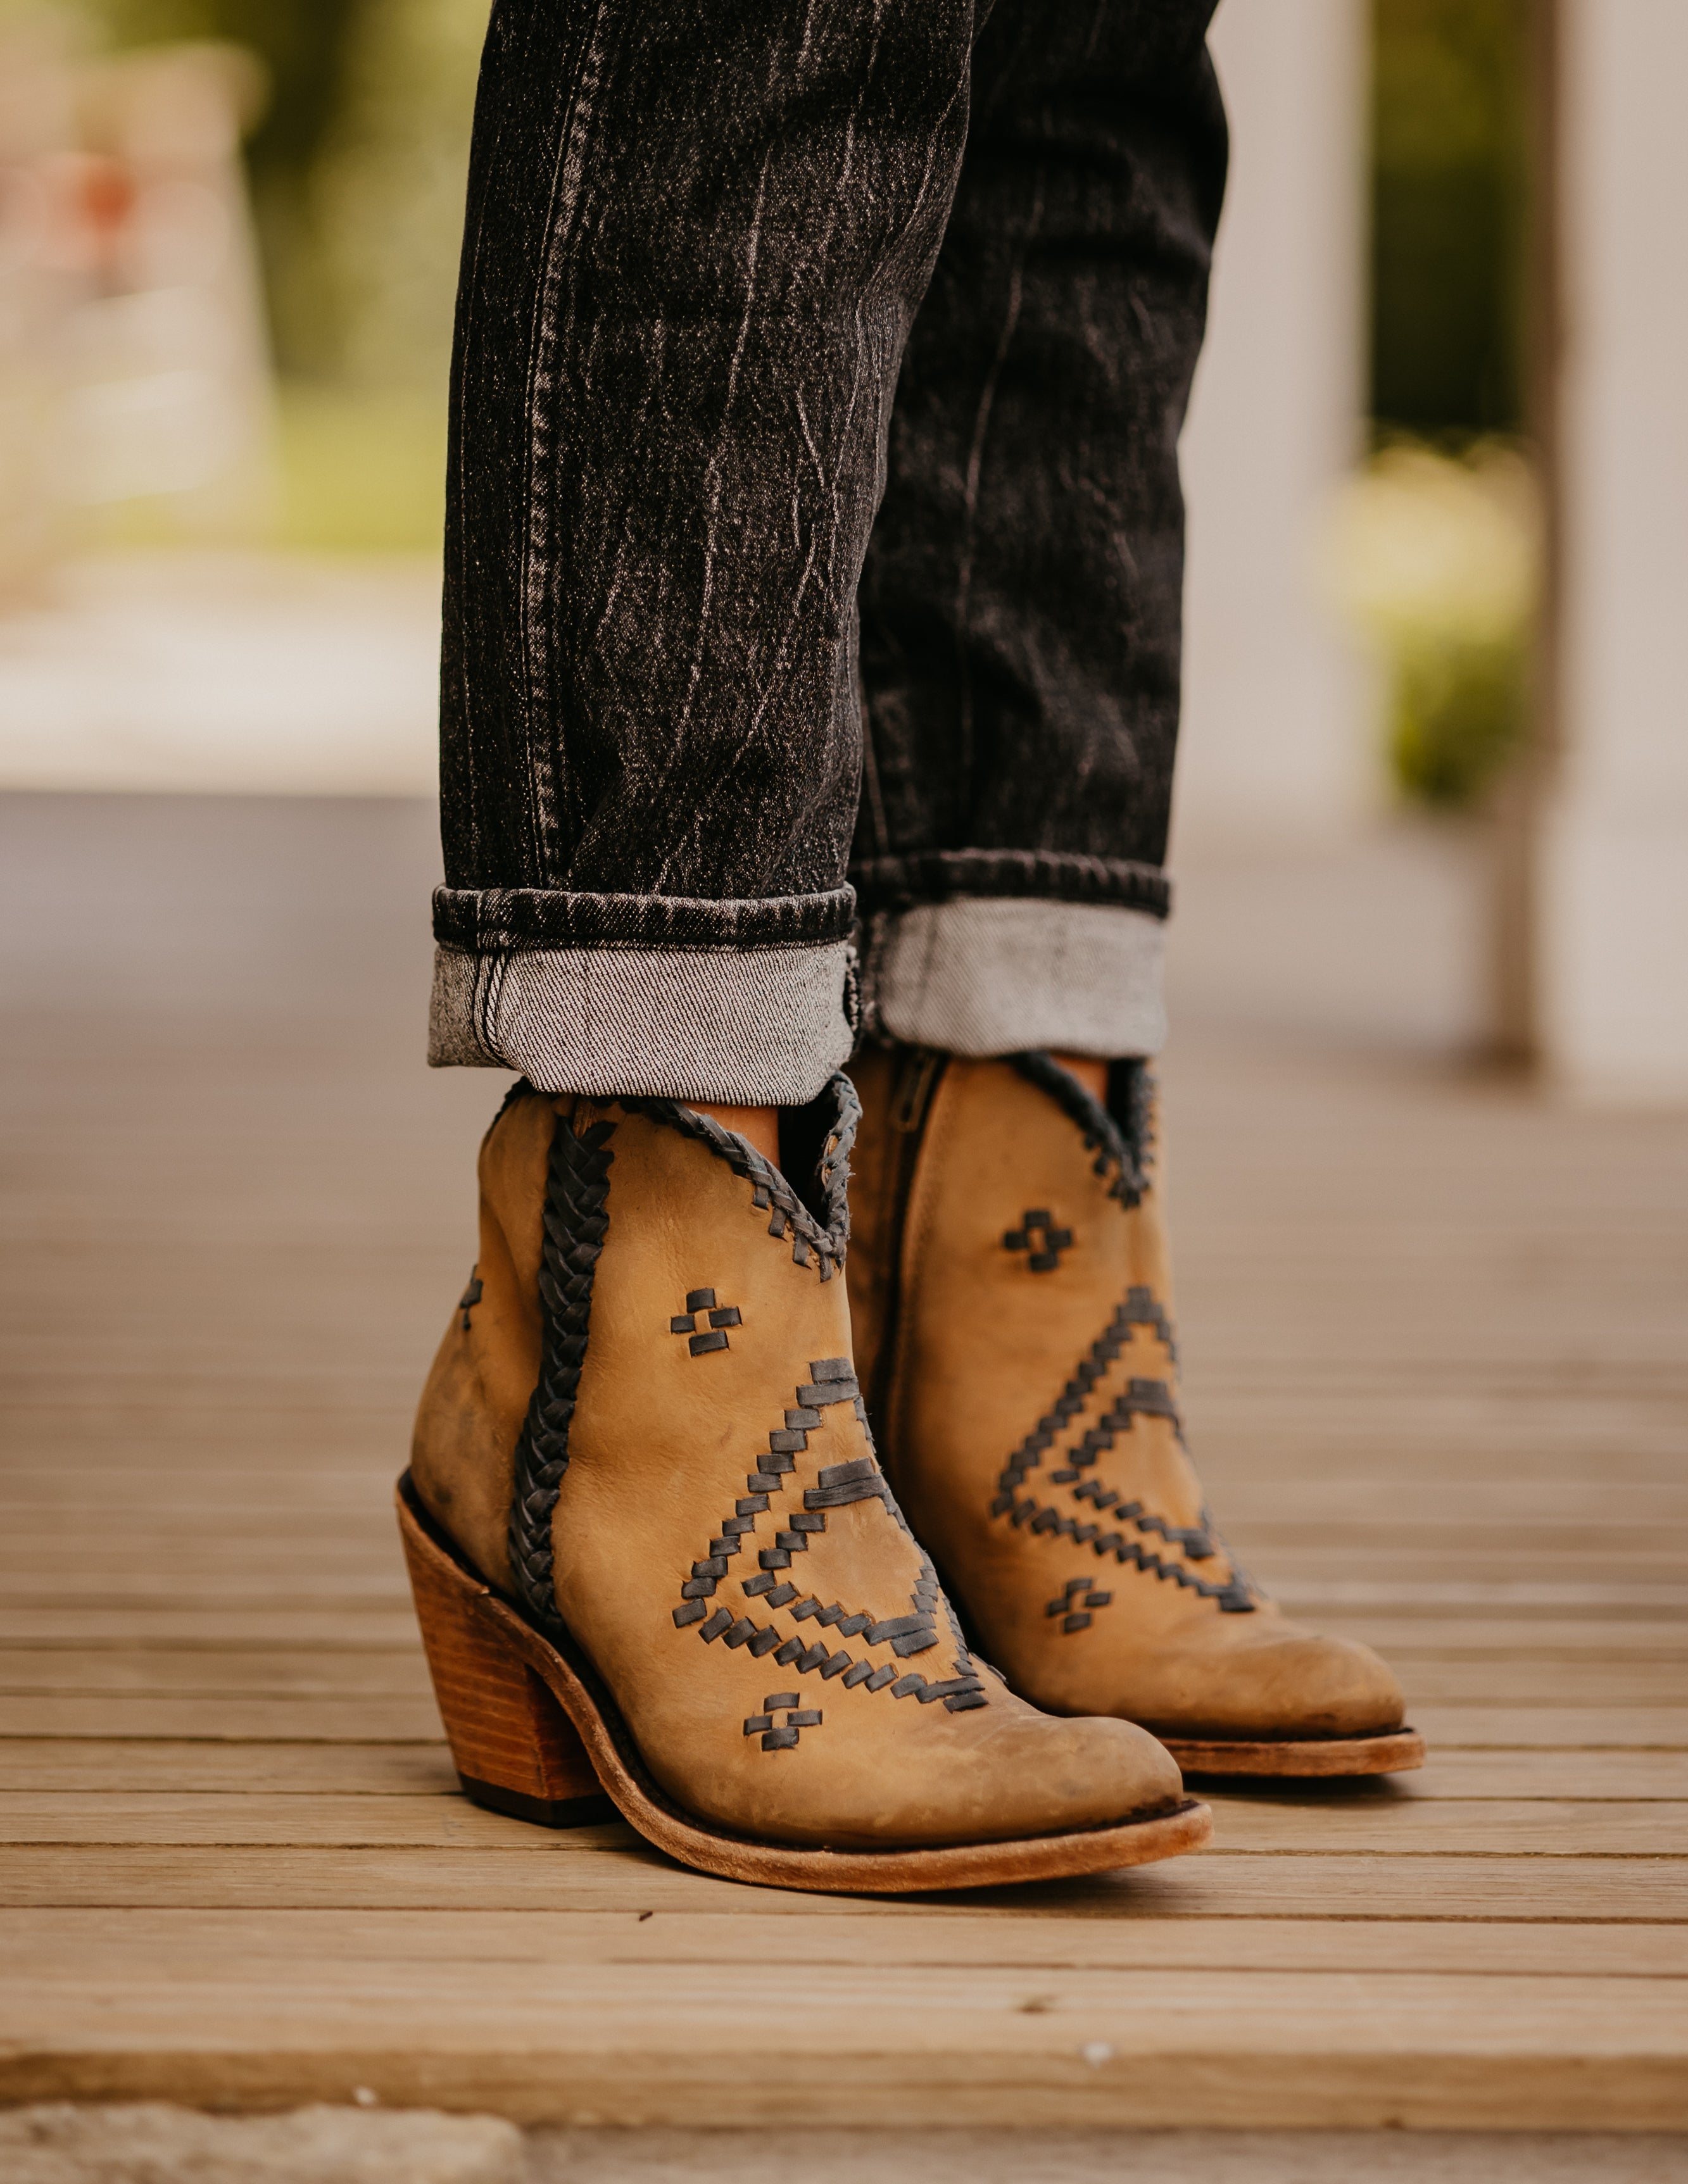 The Sade Aztec Embroidered Bootie